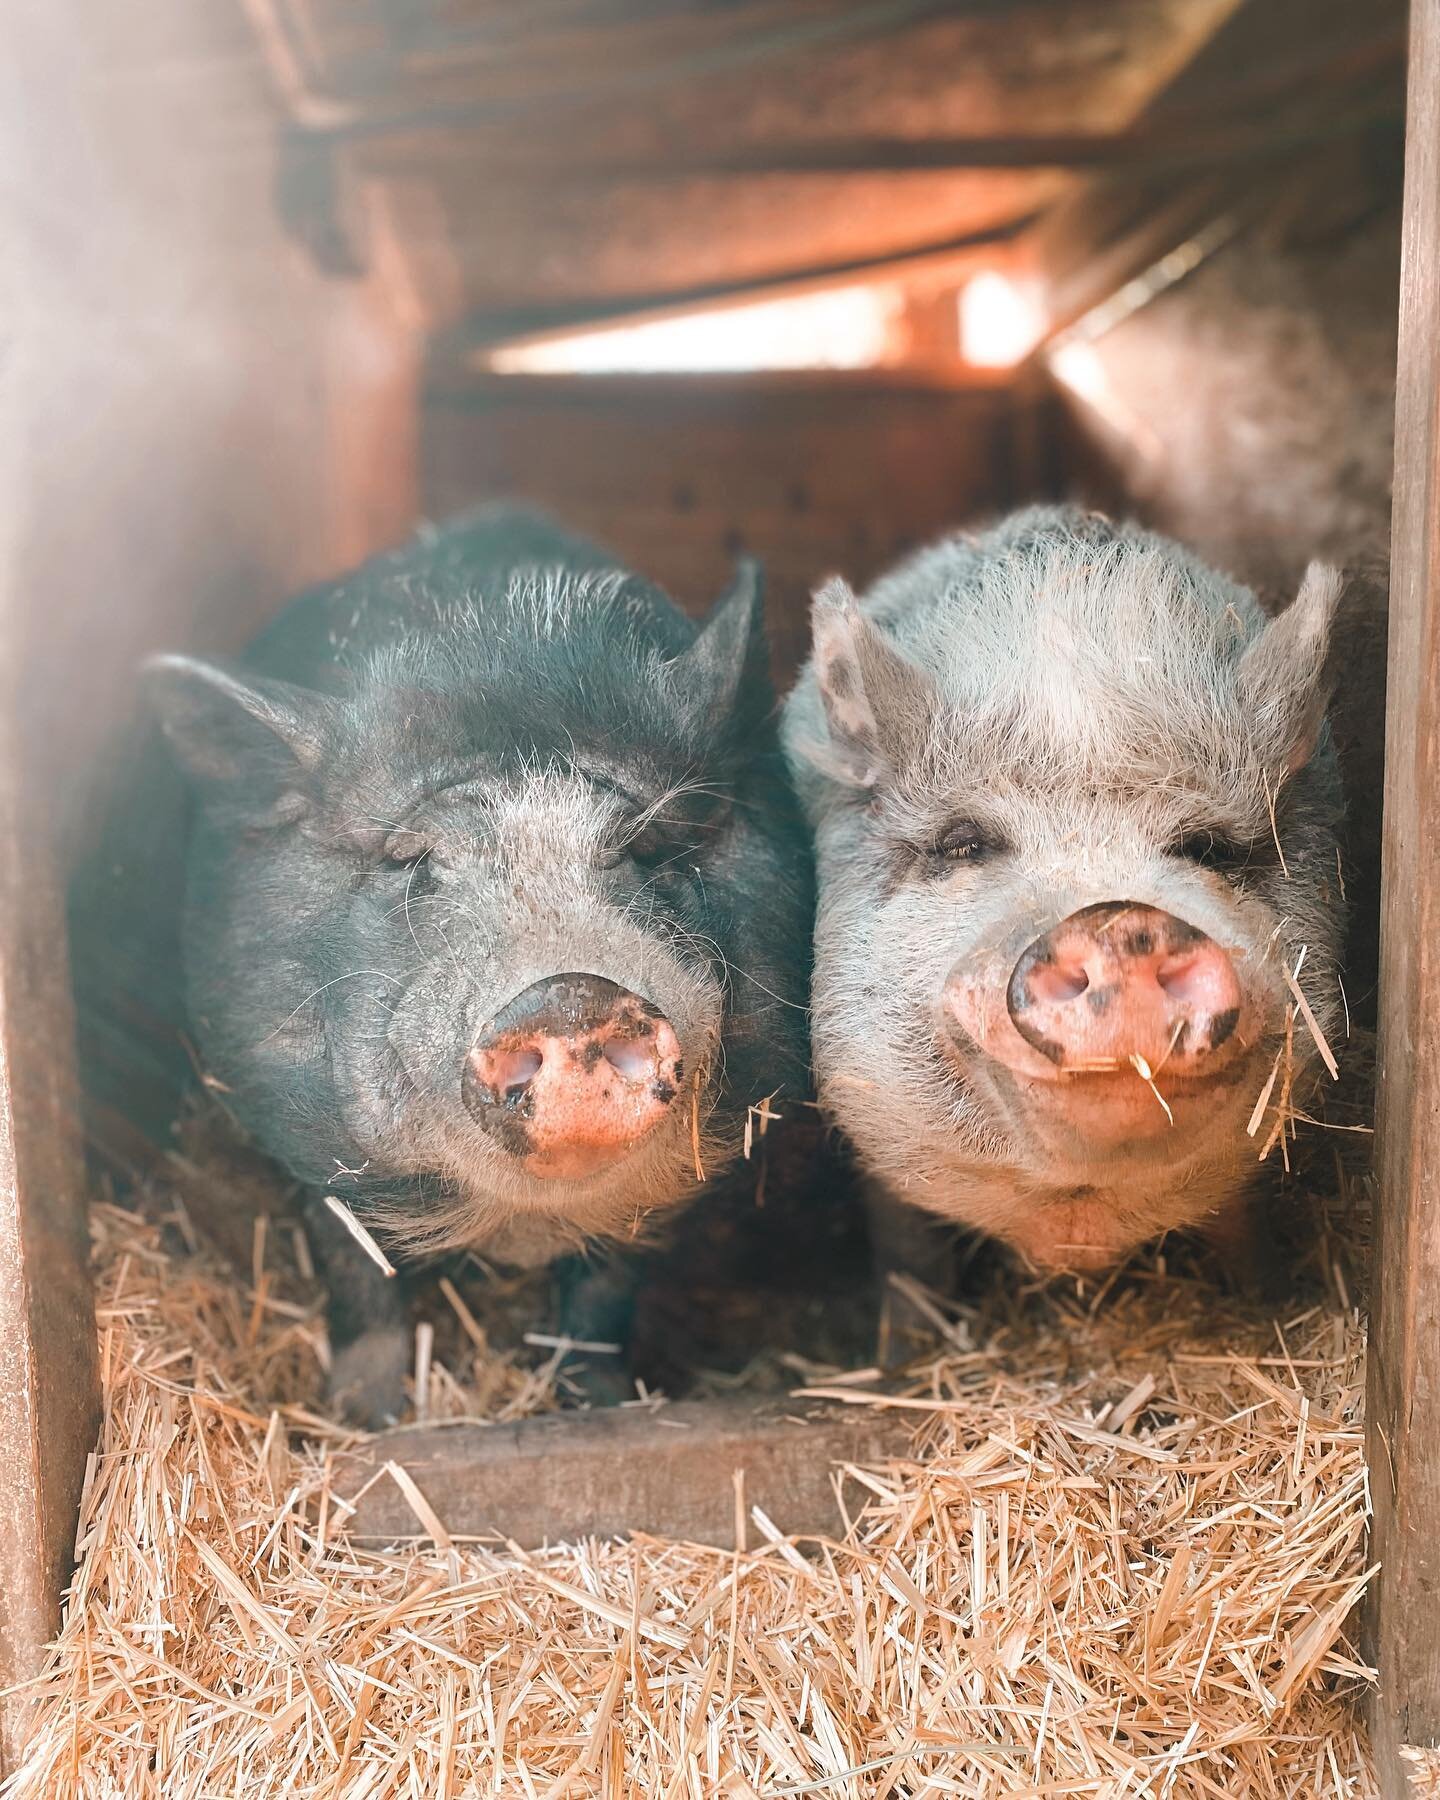 How funny are Onyx &amp; Oxy smushing their jowls against each other?! 🐷🐷 

Brothers forever! 

🏷🏷

#potbellypig #rescuedpig #animalsanctuary #westmarin #farmedanimals #cuteanimals #piggies